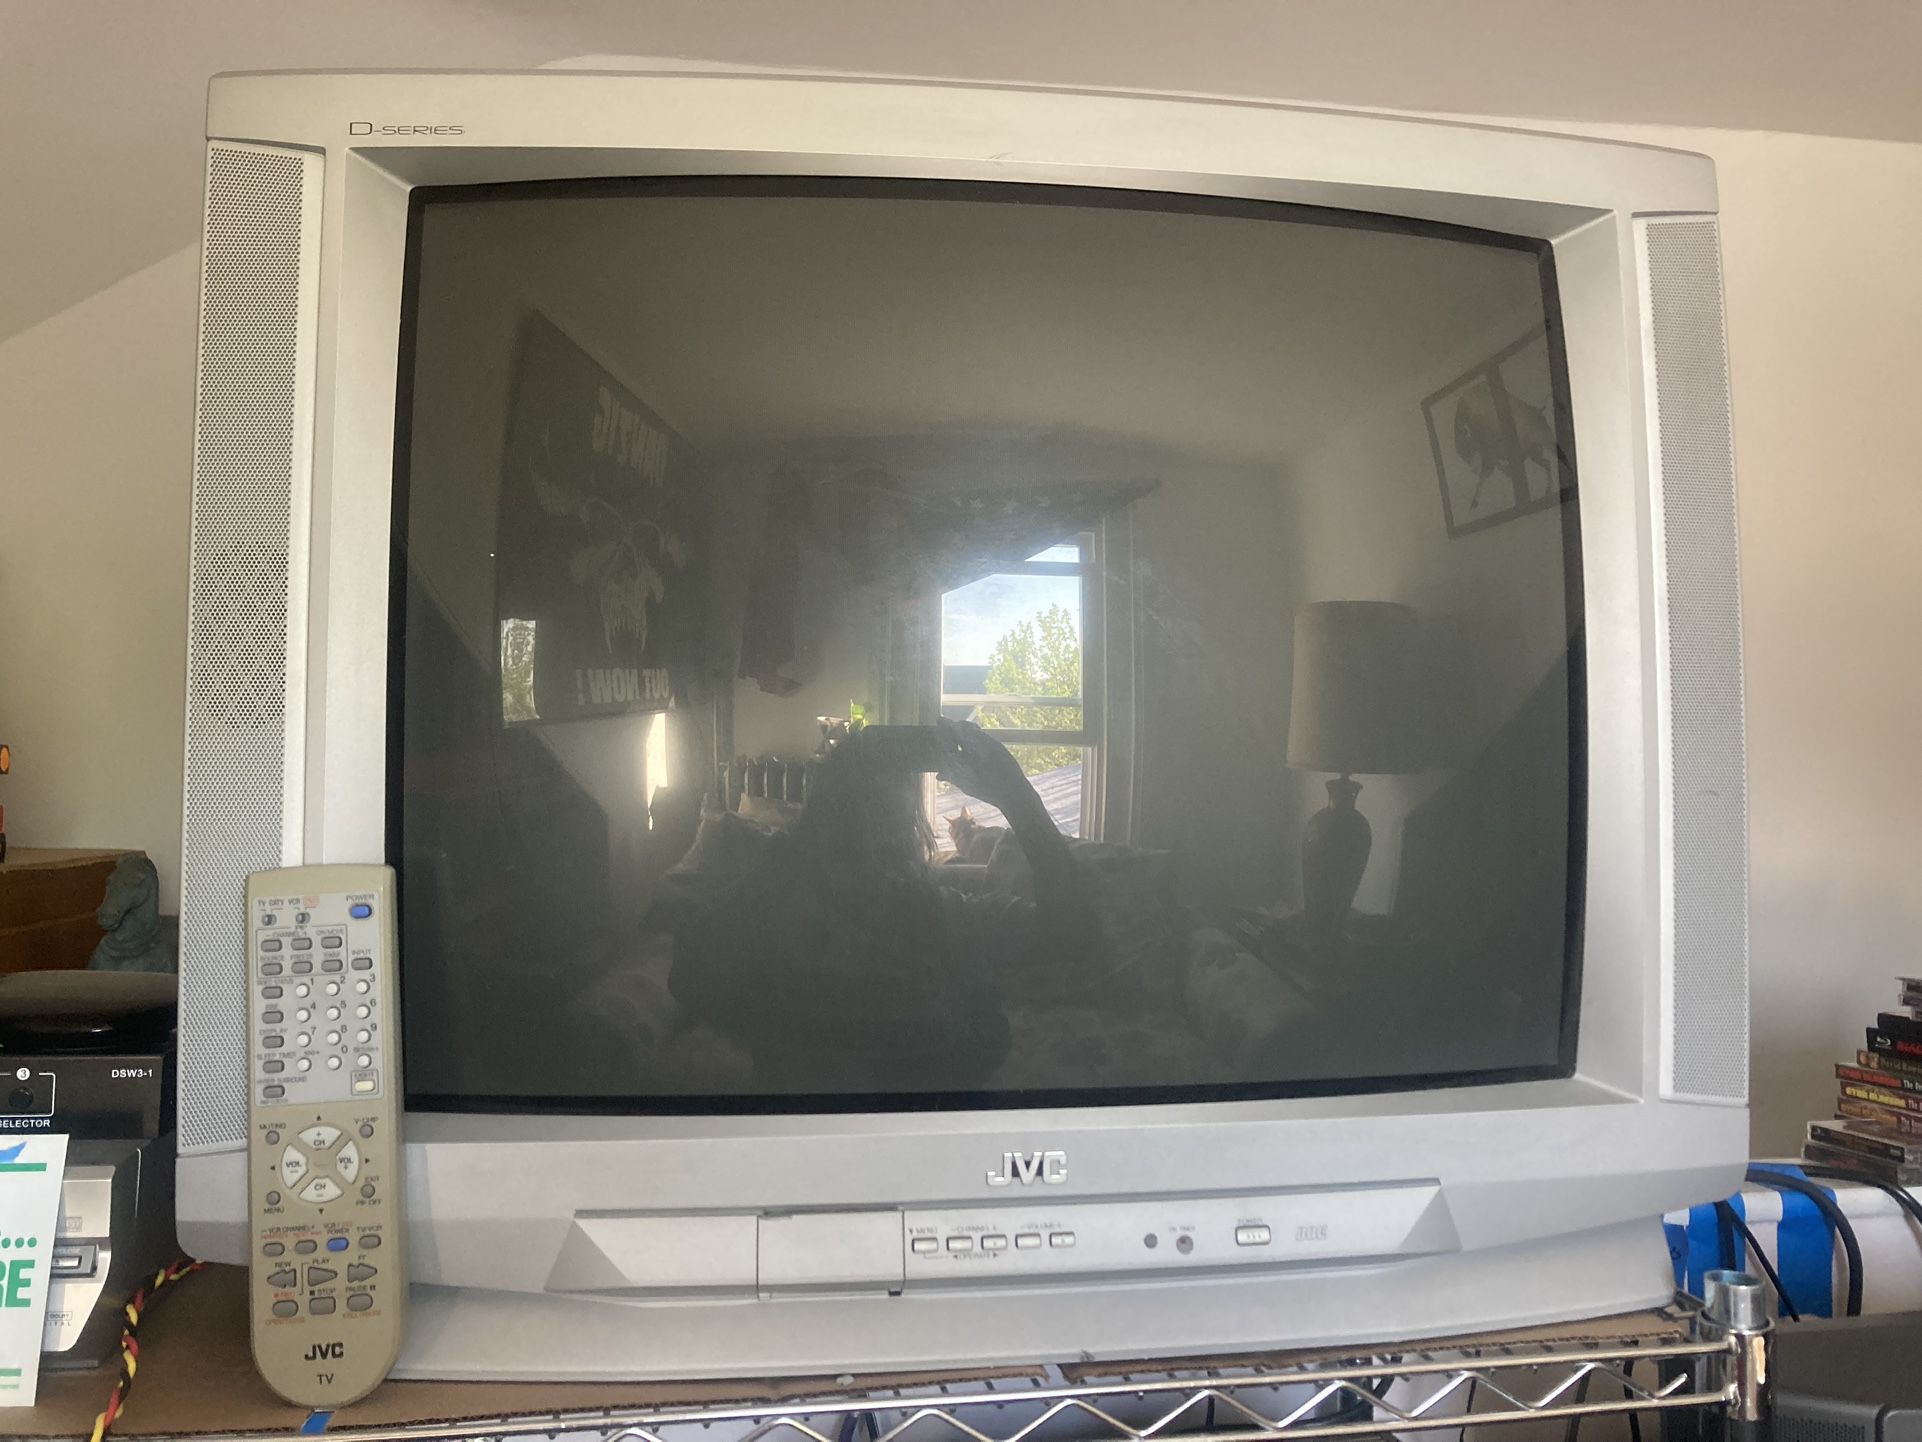 JVC D-Series 27” crt TV AV-27D302 with remote perfect for retro gaming video games